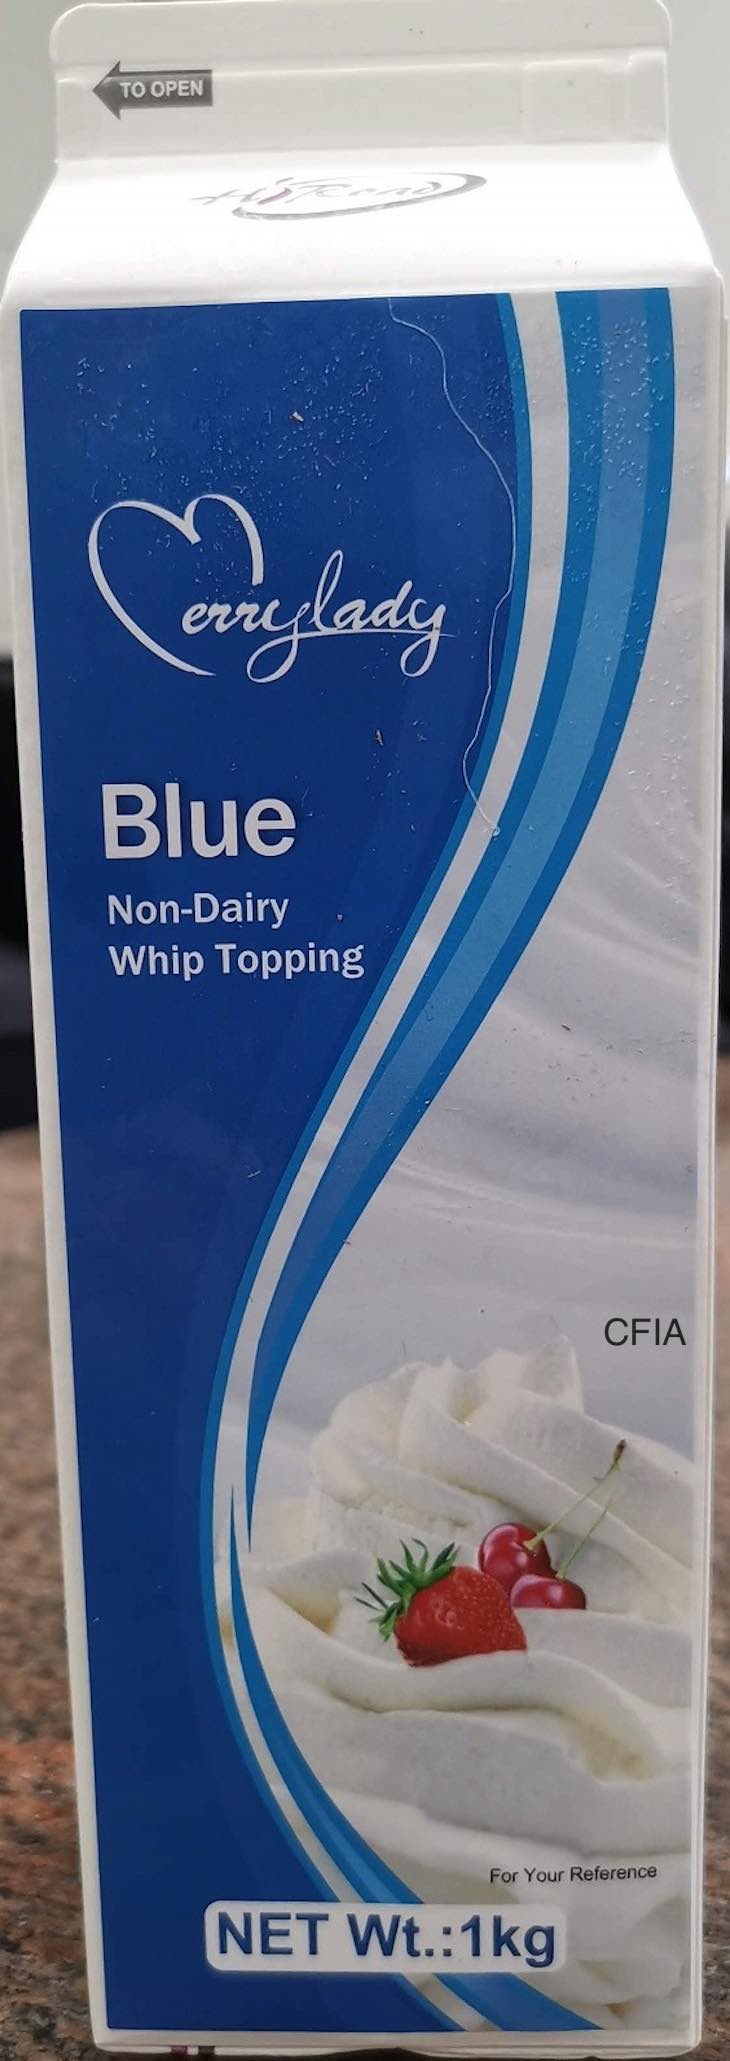 Merrylady Blue Non-Dairy Whip Topping Recalled For Allergen